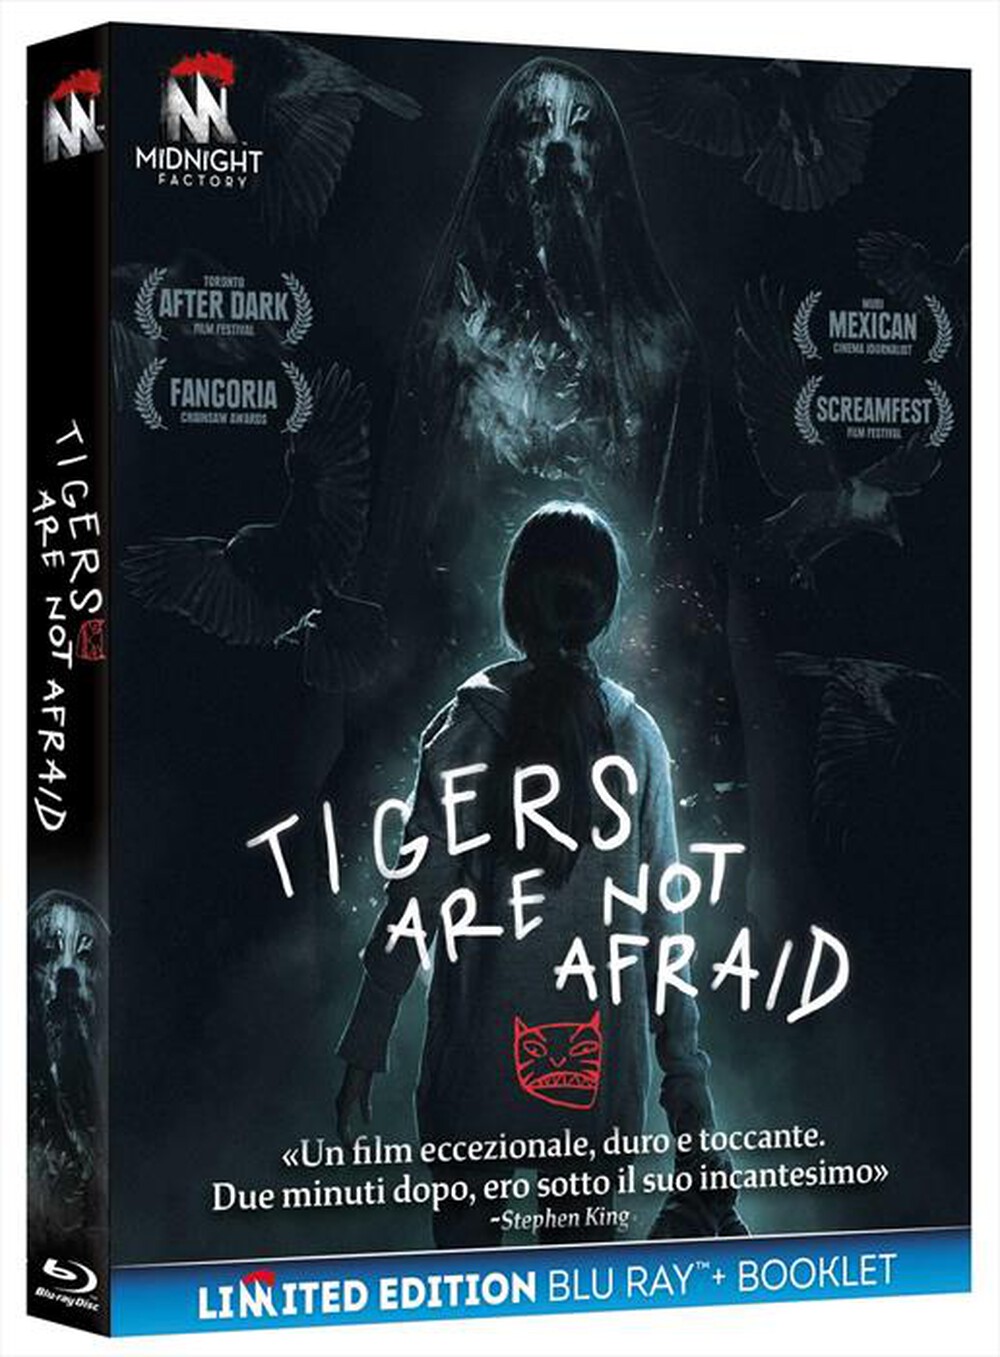 "Midnight Factory - Tigers Are Not Afraid (Blu-Ray+Booklet)"